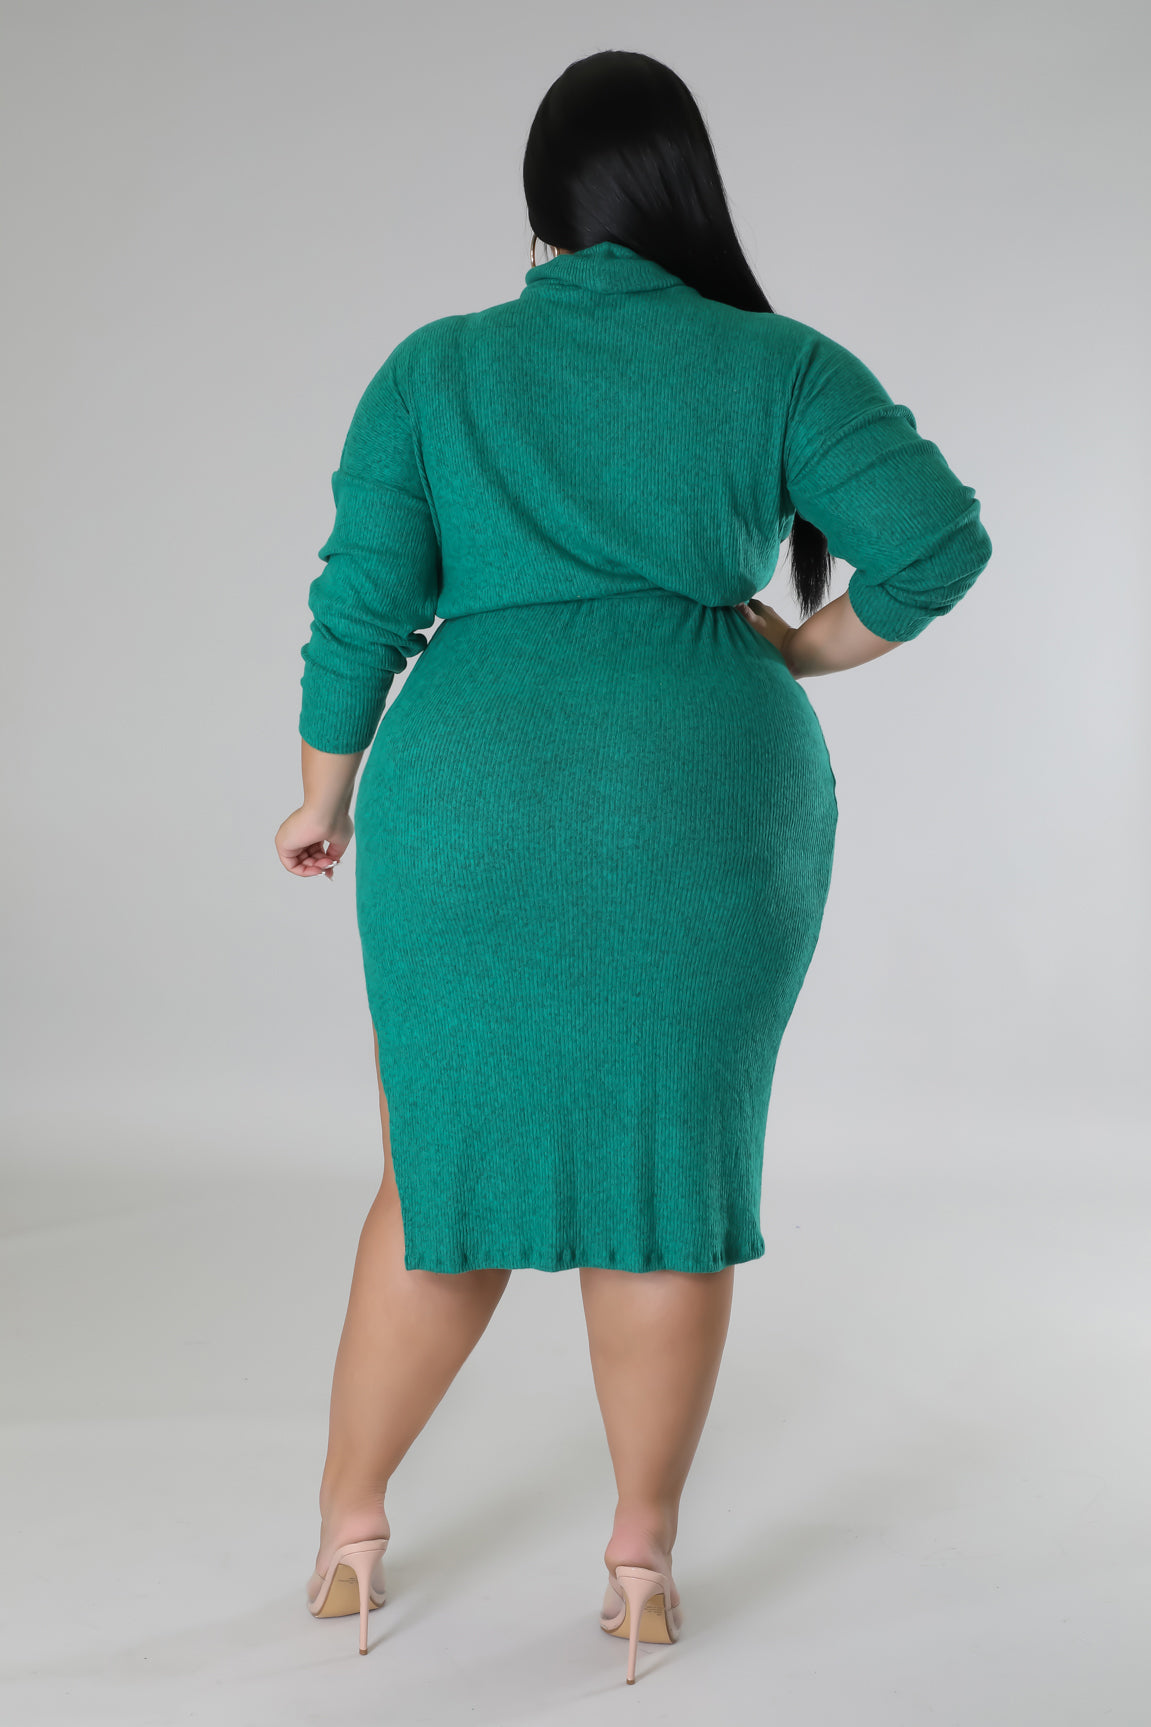 Rear view of model wearing cozy knit turtle neck dress with slit